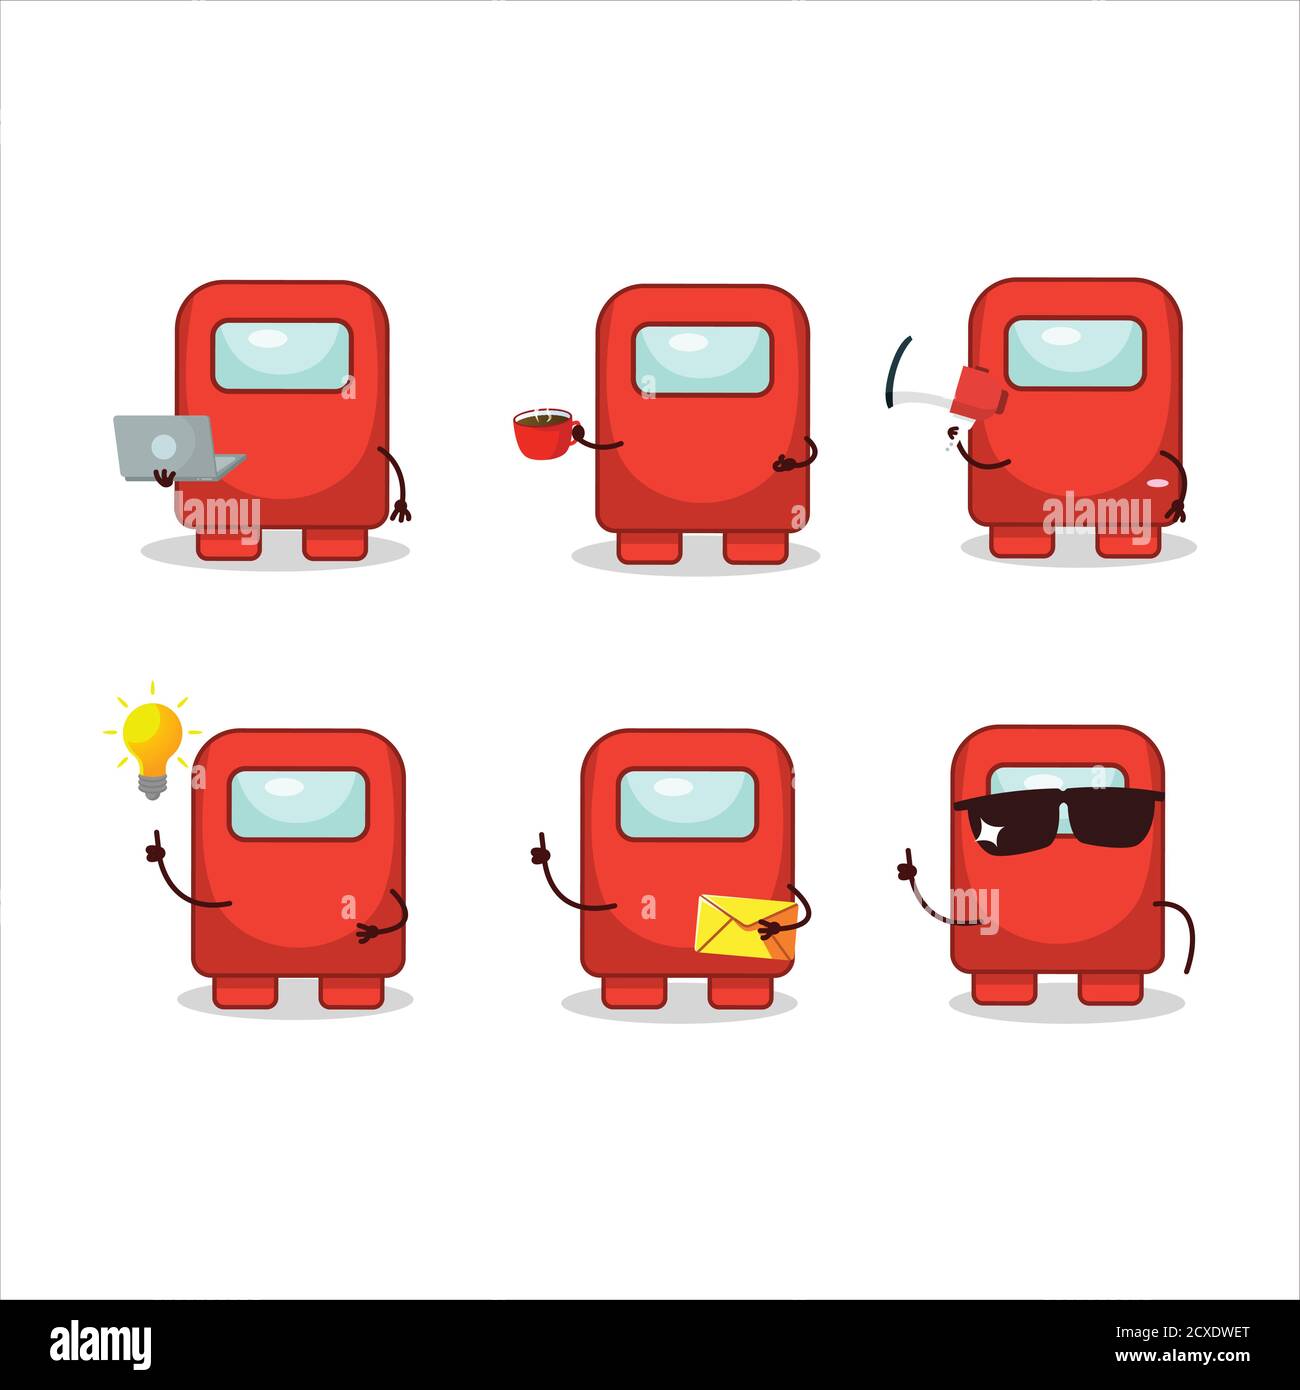 Among us red cartoon character with various types of business emoticons Stock Vector